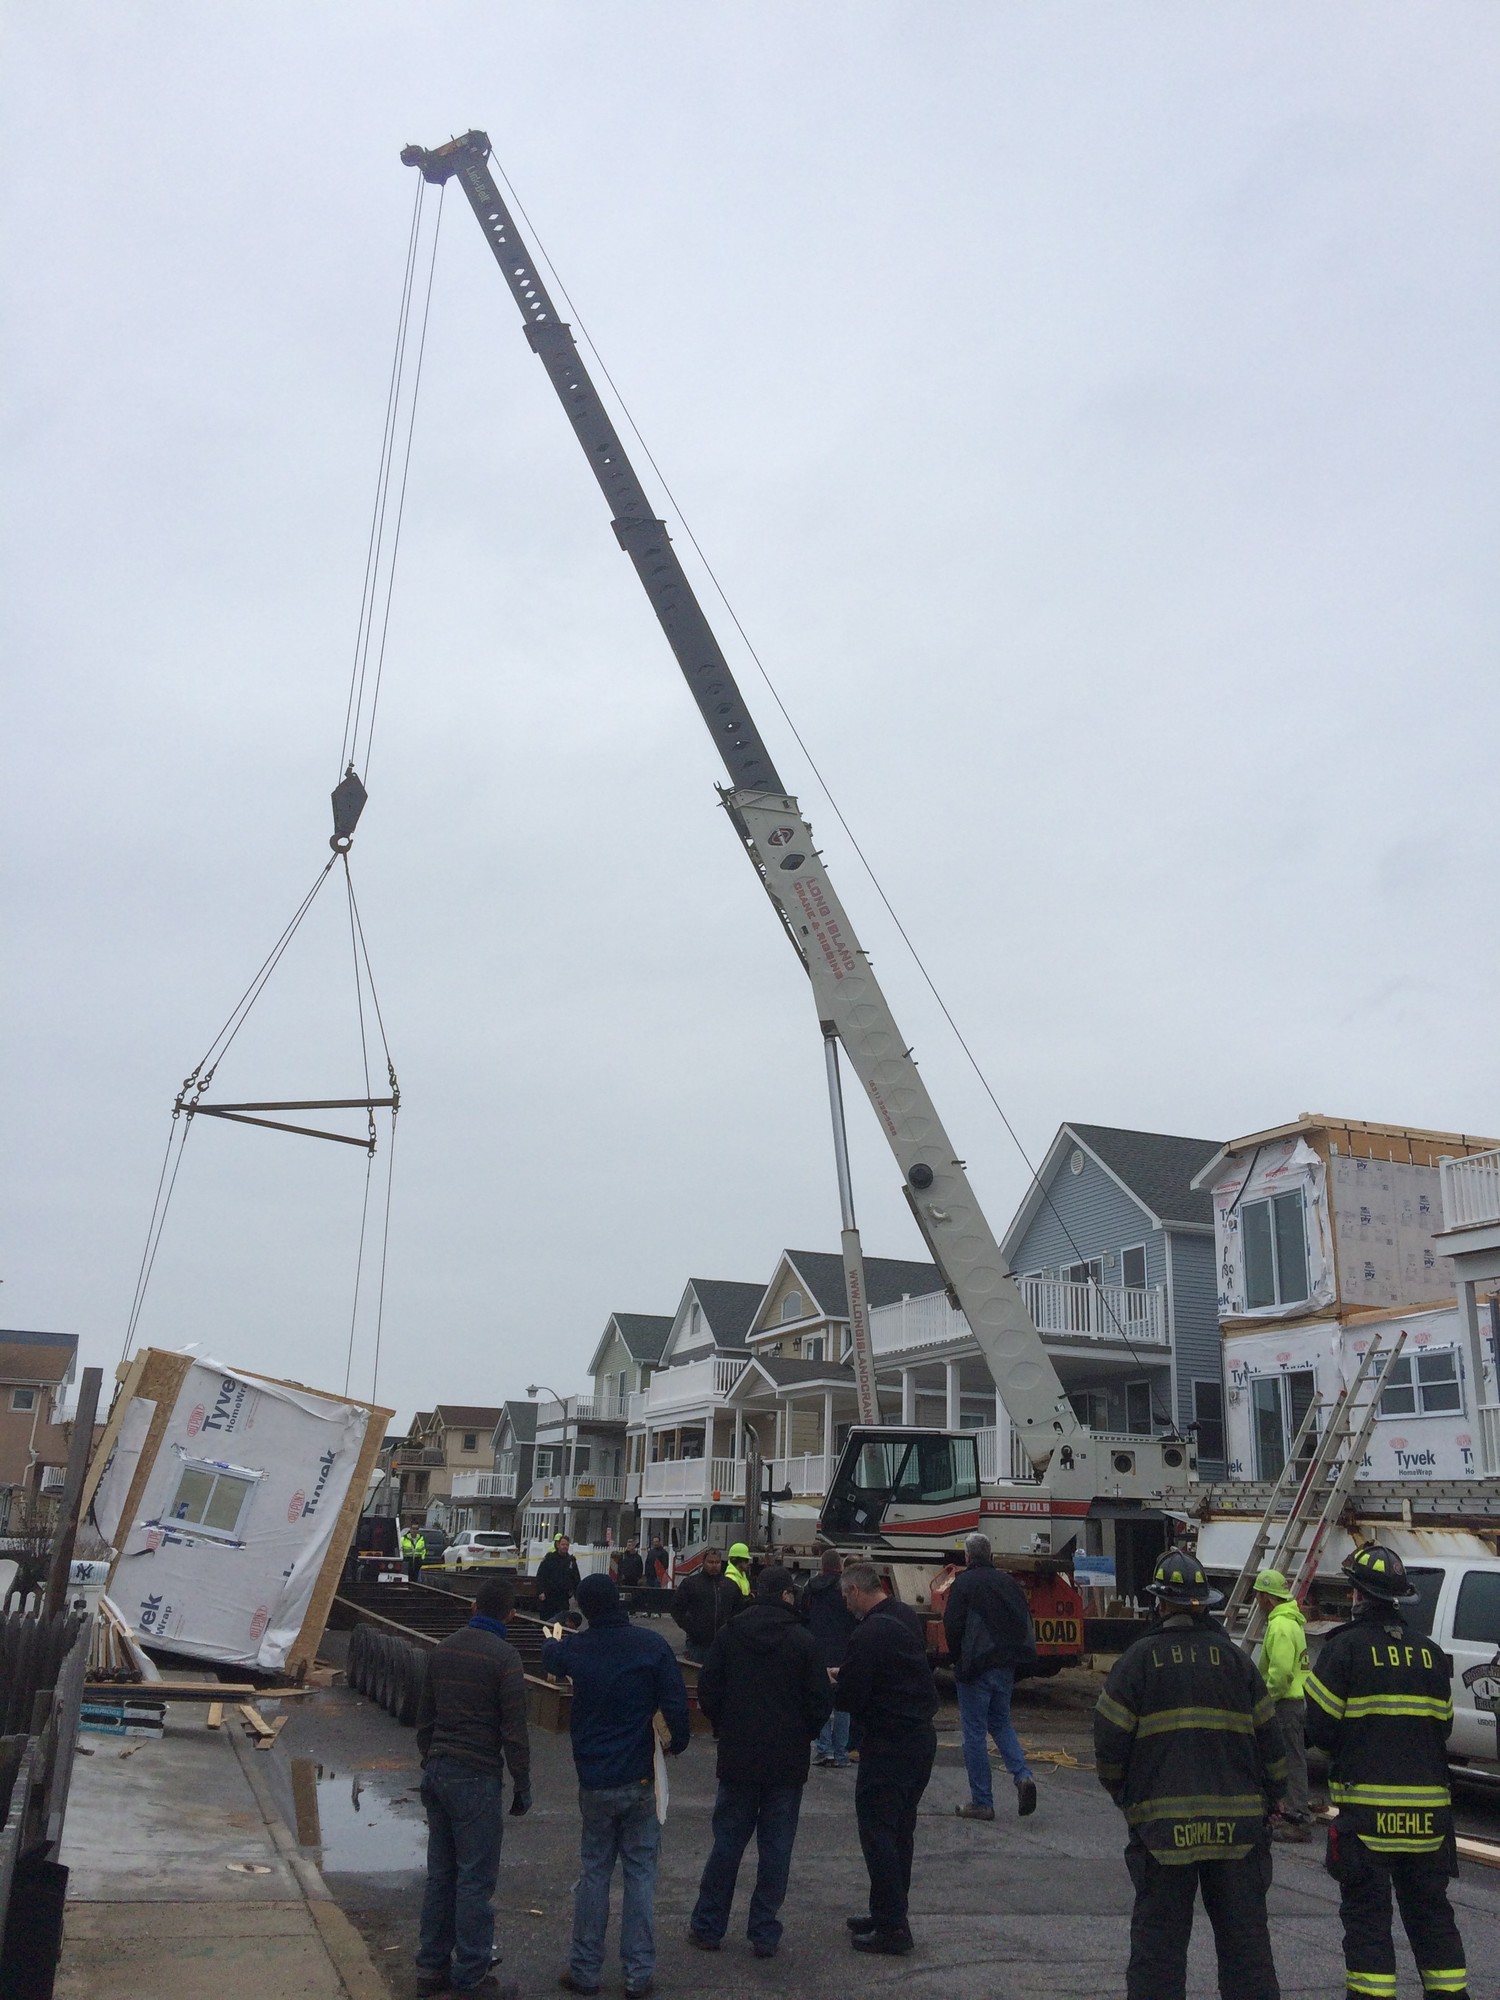 Officials said the unit had shifted as it was elevated by the crane.